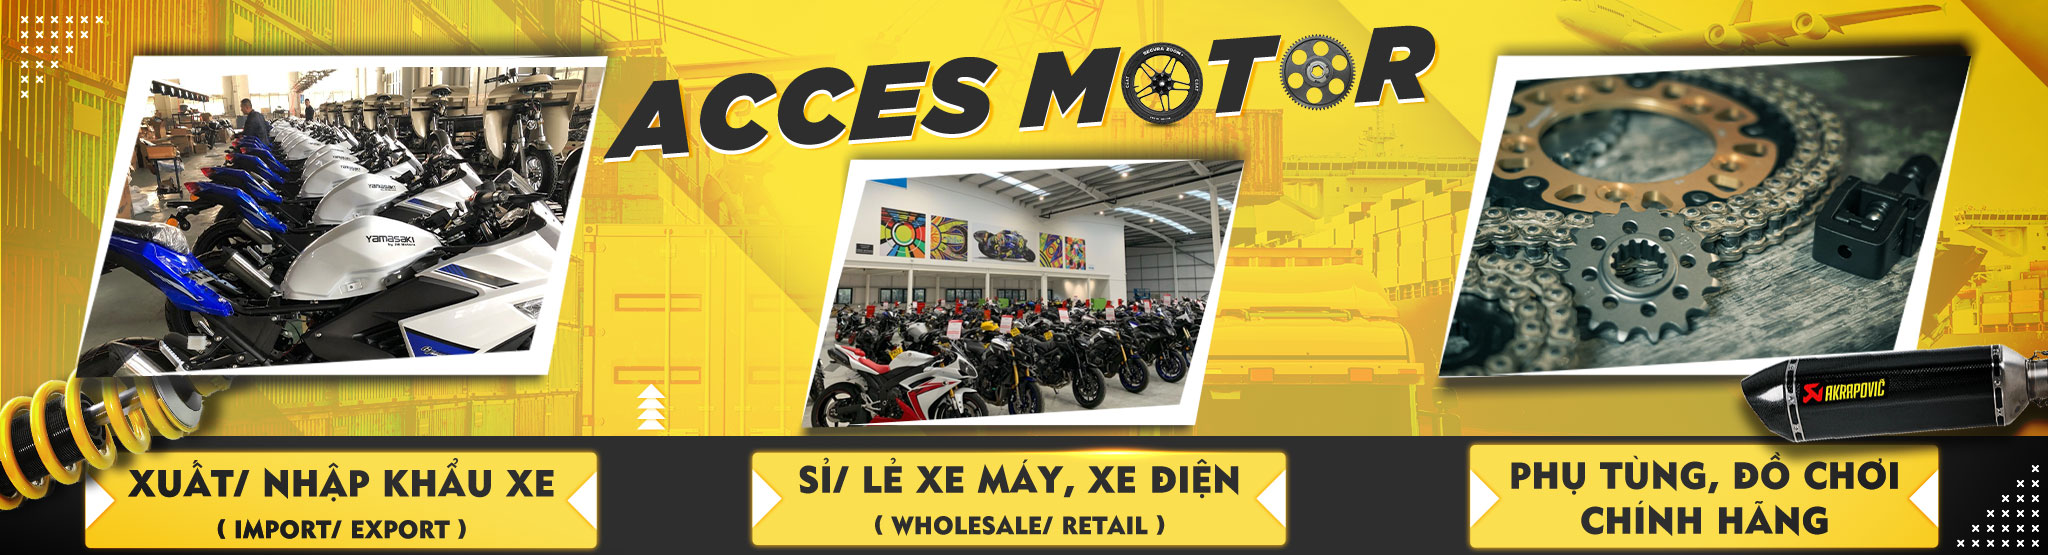 Banner Acces Motor